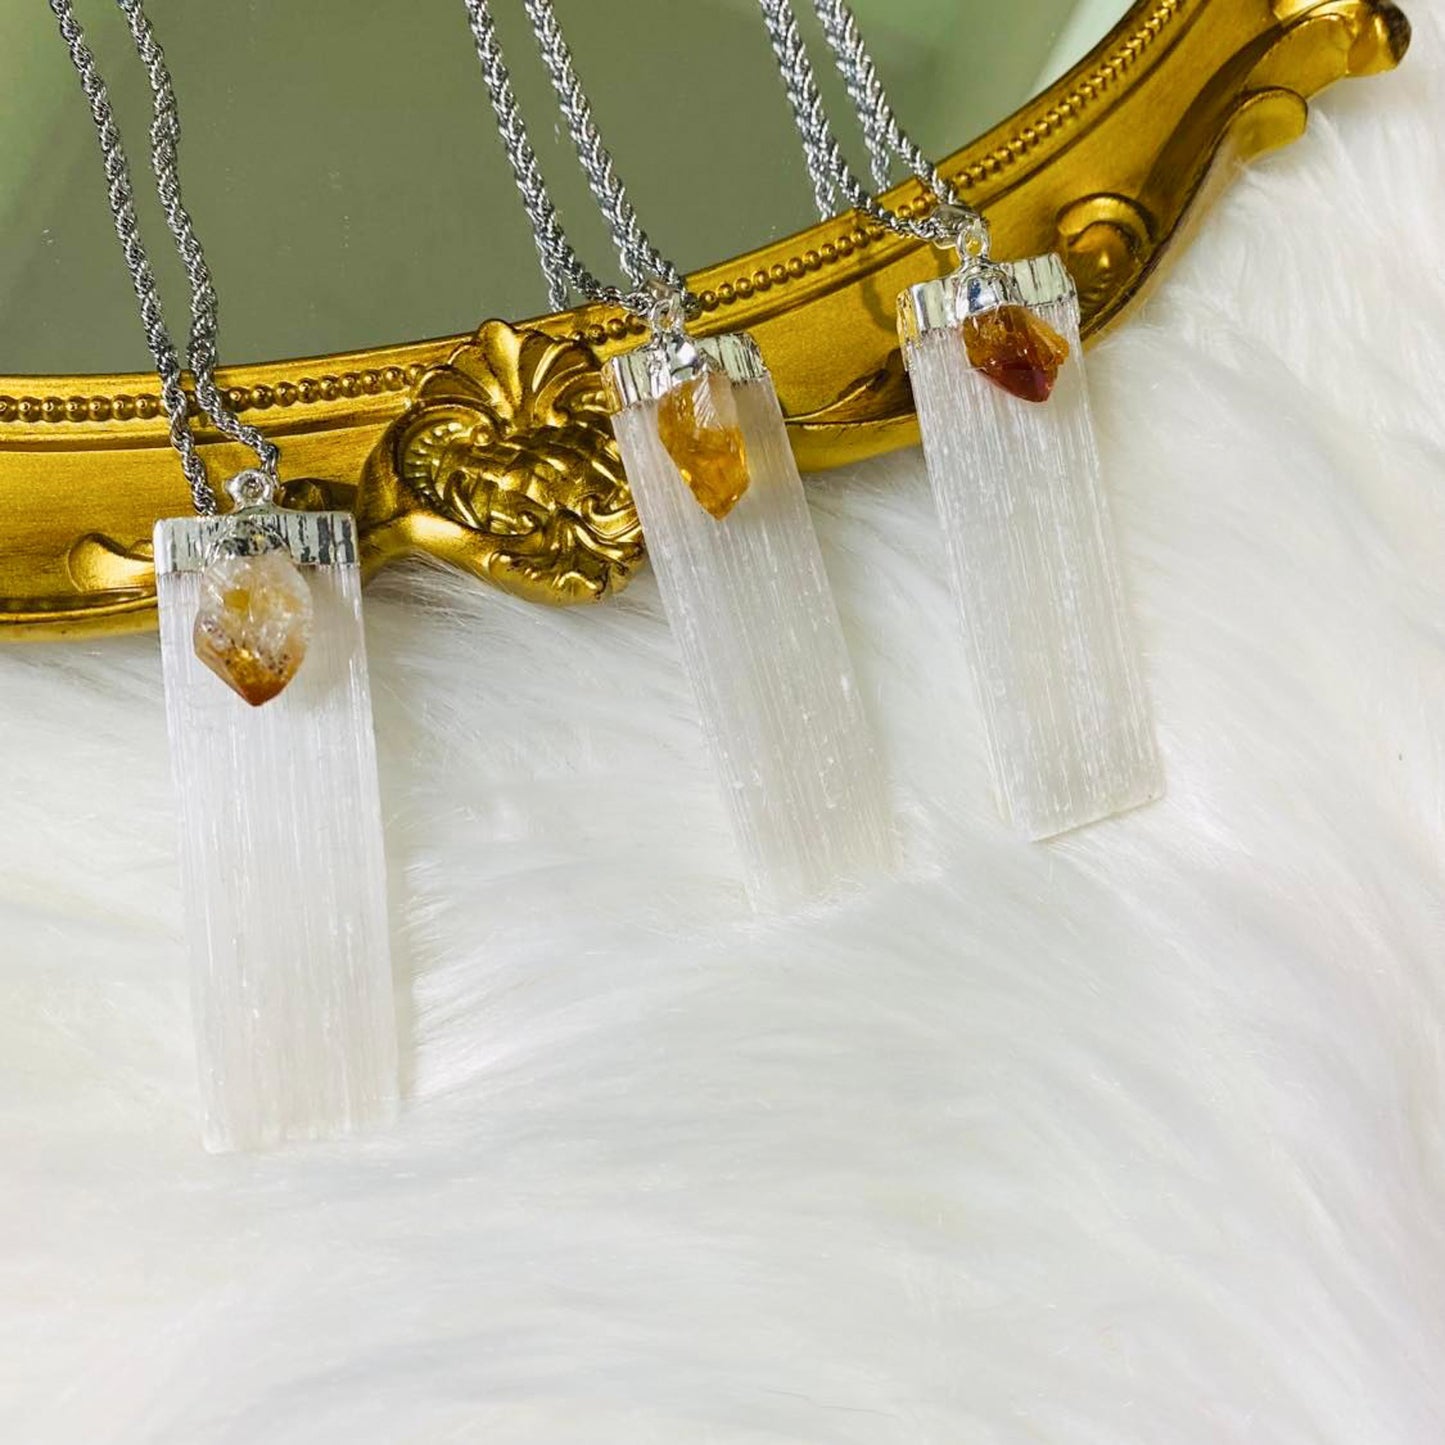 Selenite Crystal Pendant with Citrine, Stone for Cleansing and Wealth